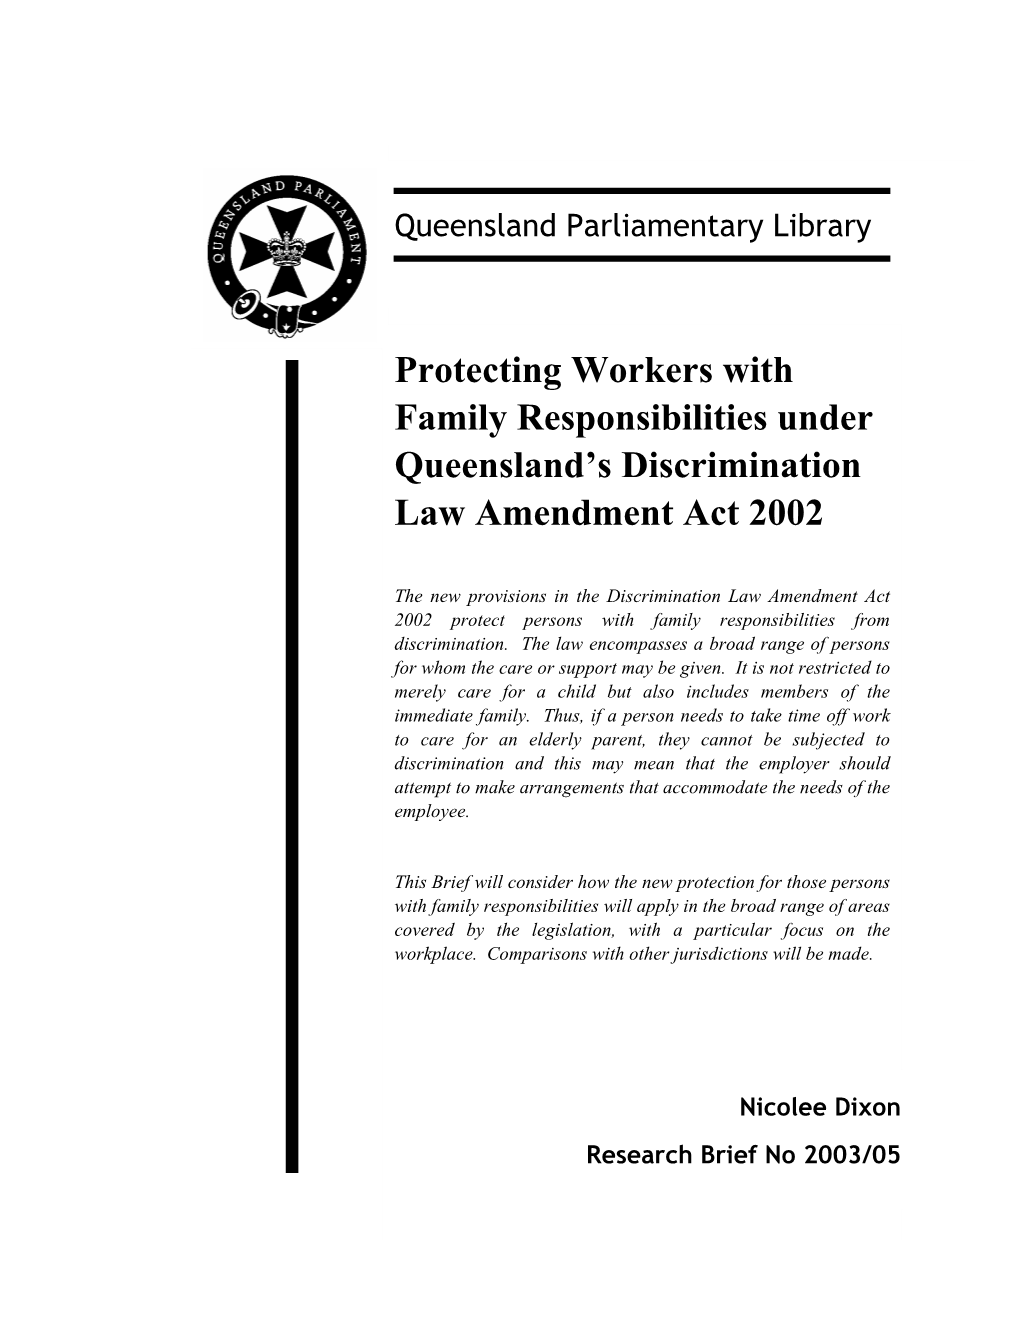 Protecting Workers with Family Responsibilities Under Queensland's Discrimination Law Amendment Act 2002